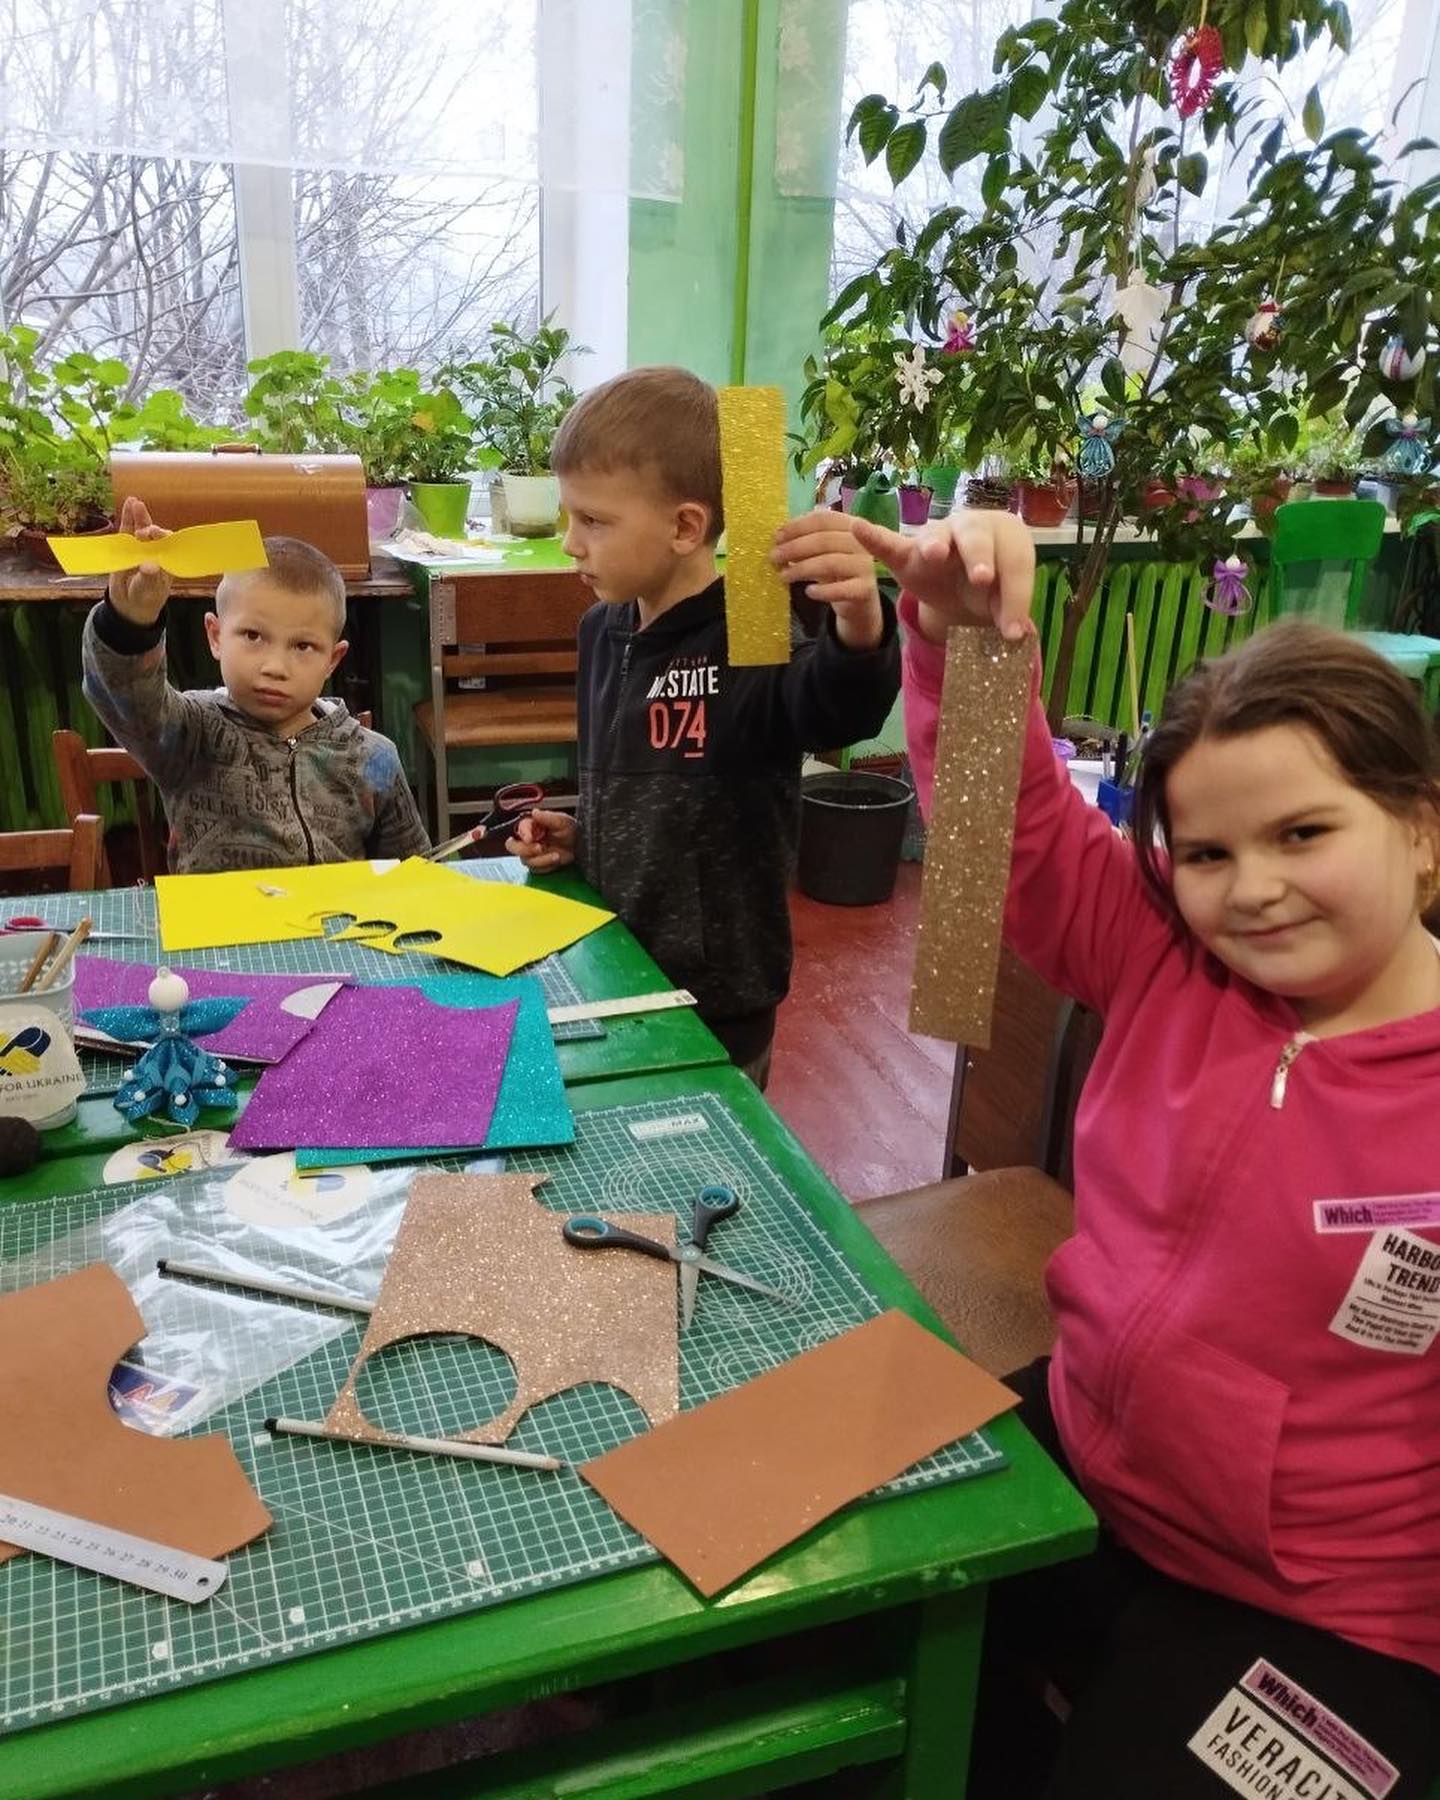 A group of children are making crafts in a classroom.